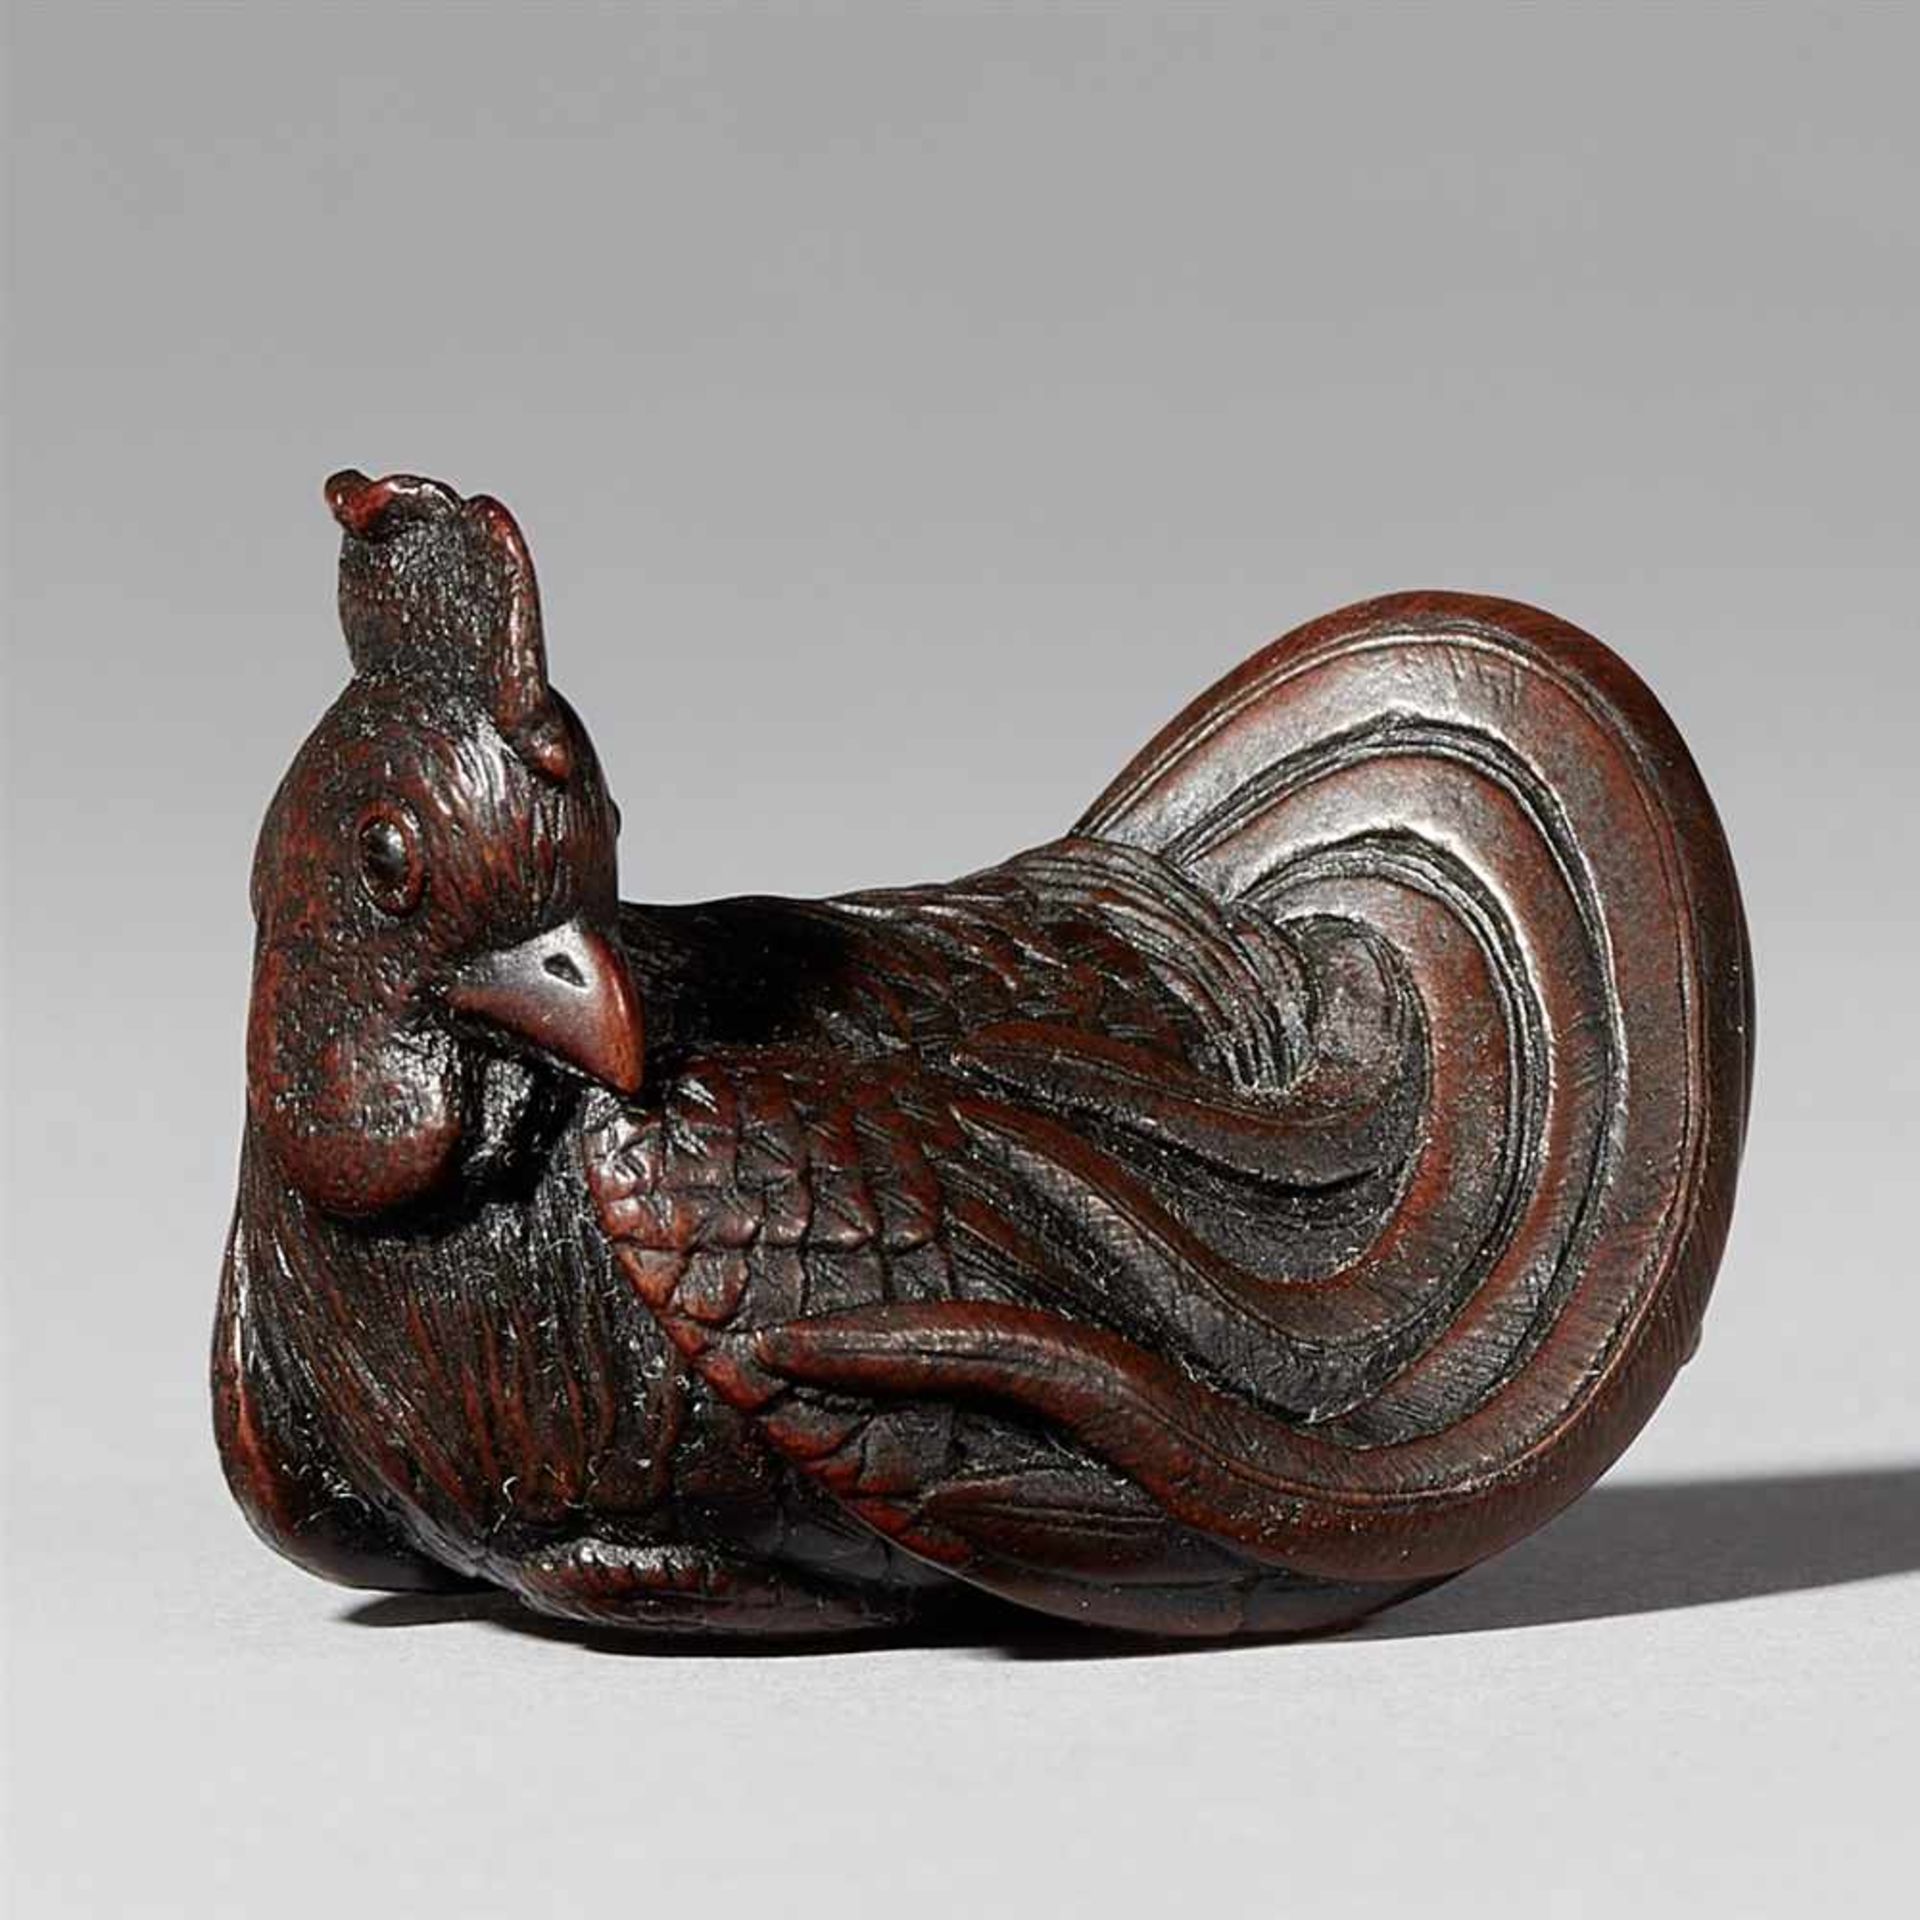 A fine wood netsuke of a rooster, by Itsumin. 19th century